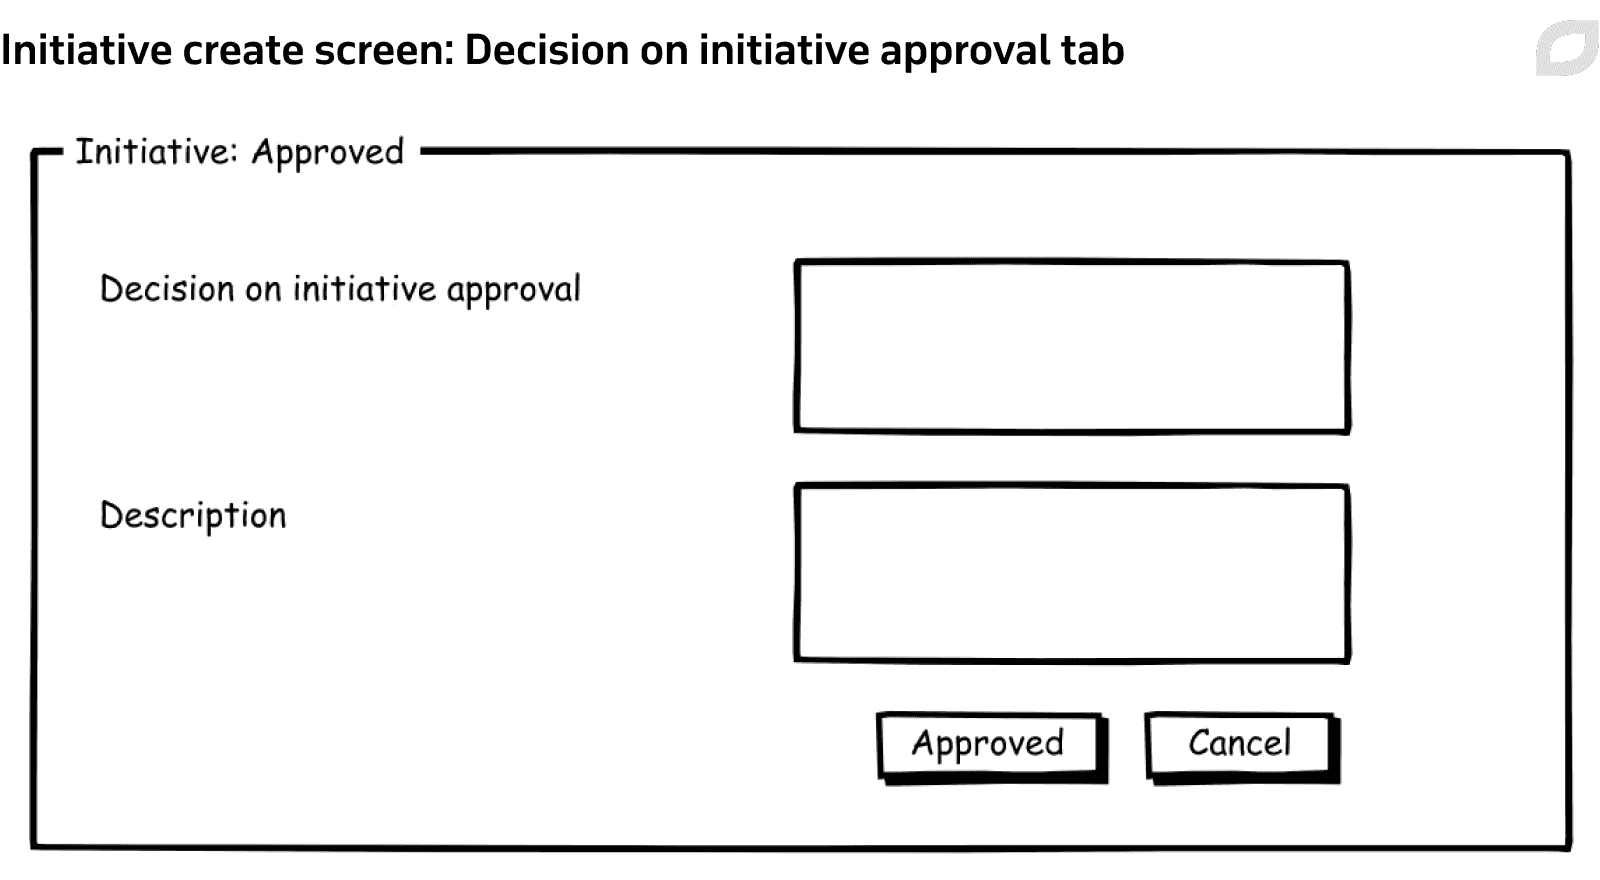 Initiative create screen: Decision on initiative approval tab